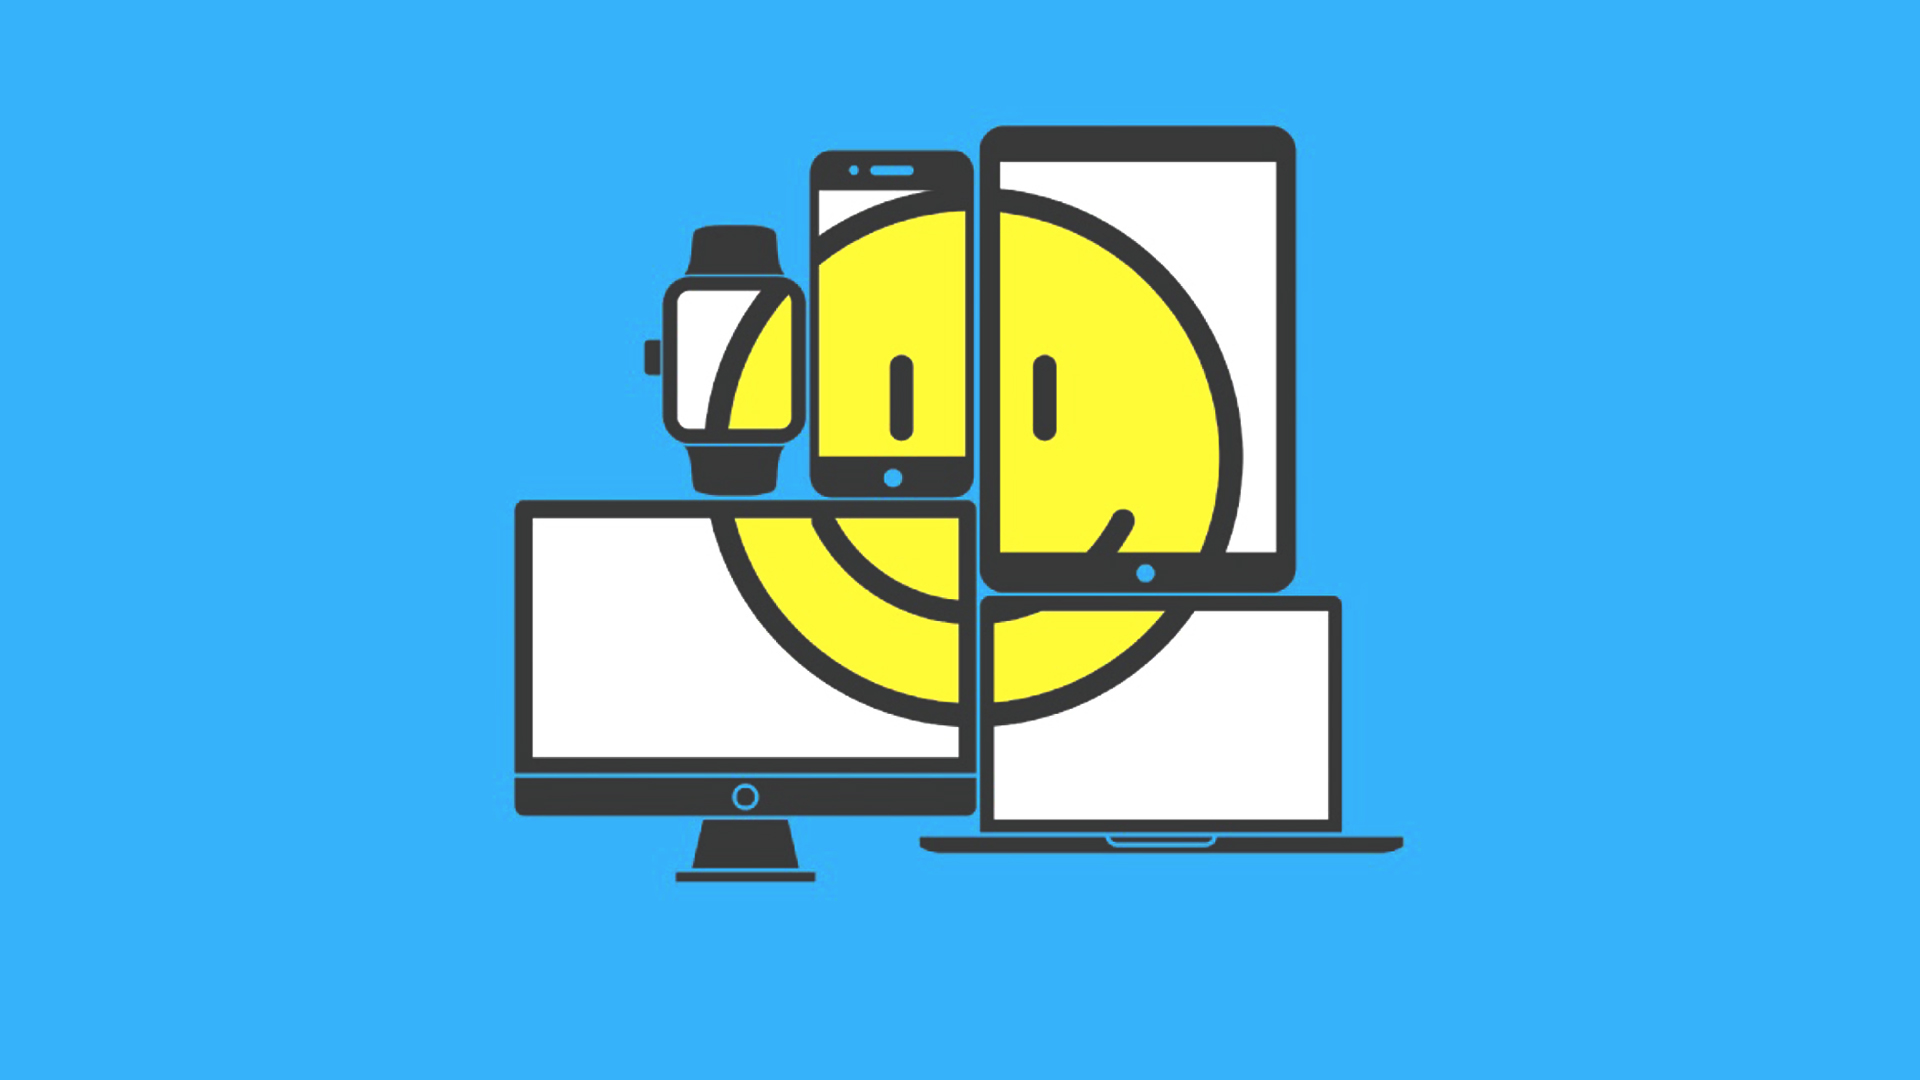 Smiley face across several mobile devices